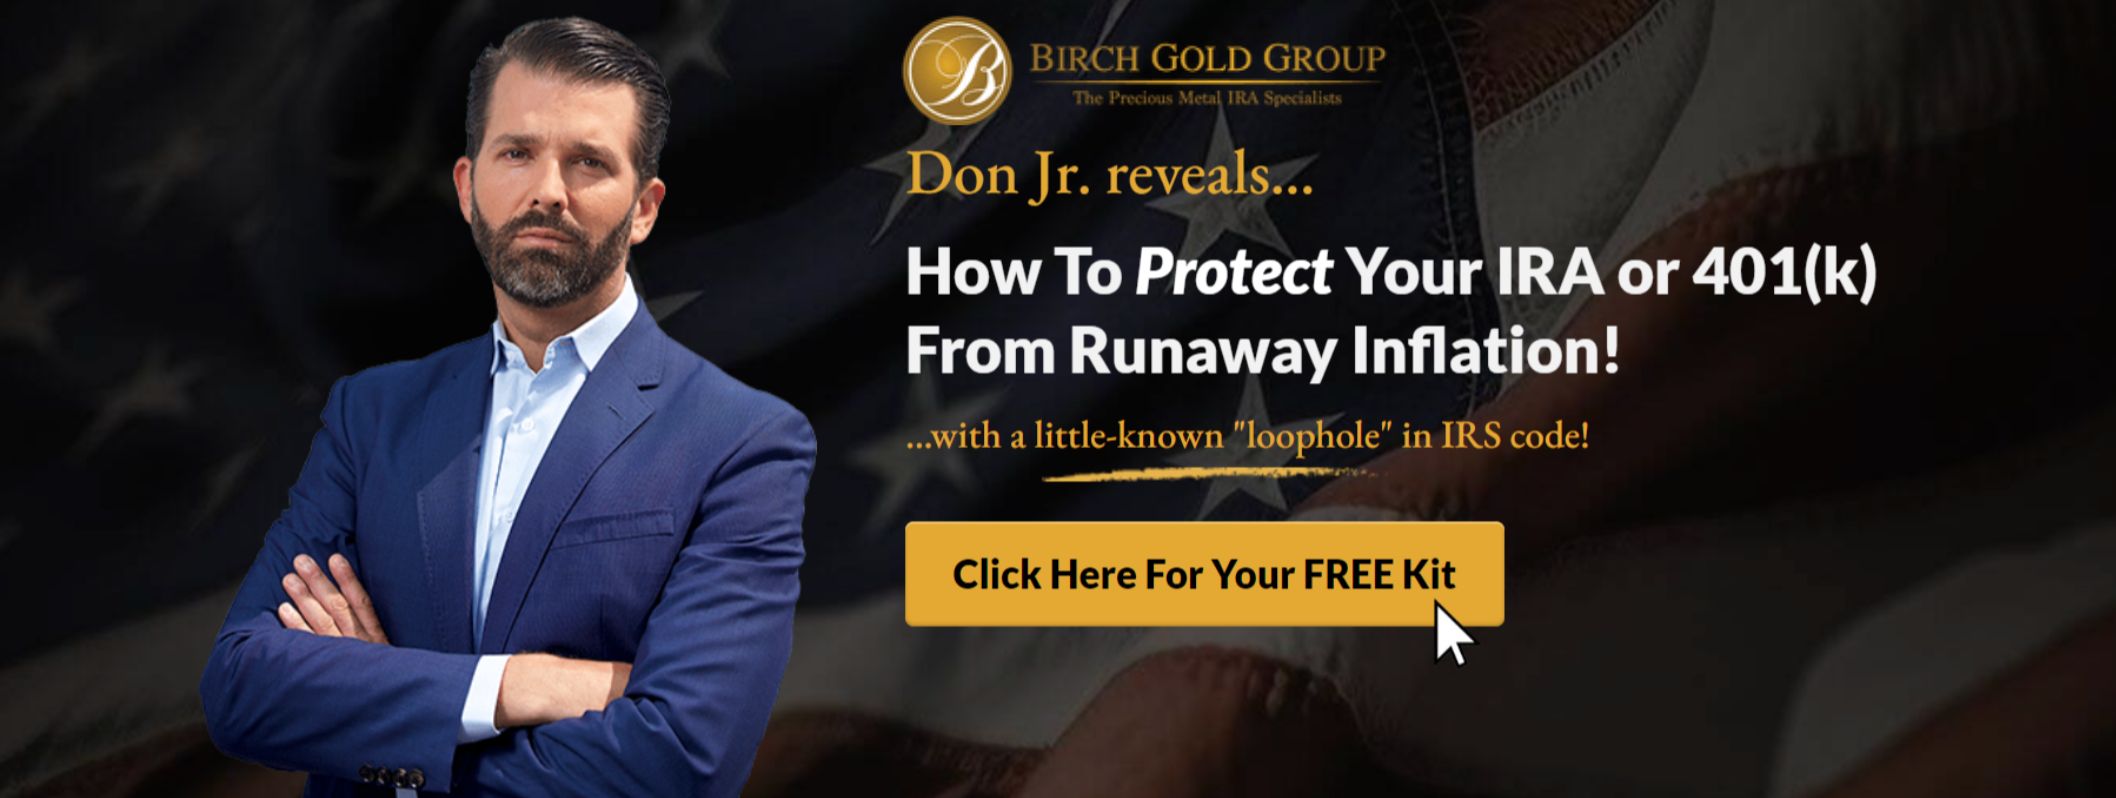 Info related to Donald Trump Jr. revealing how to protect IRA's from inflation.